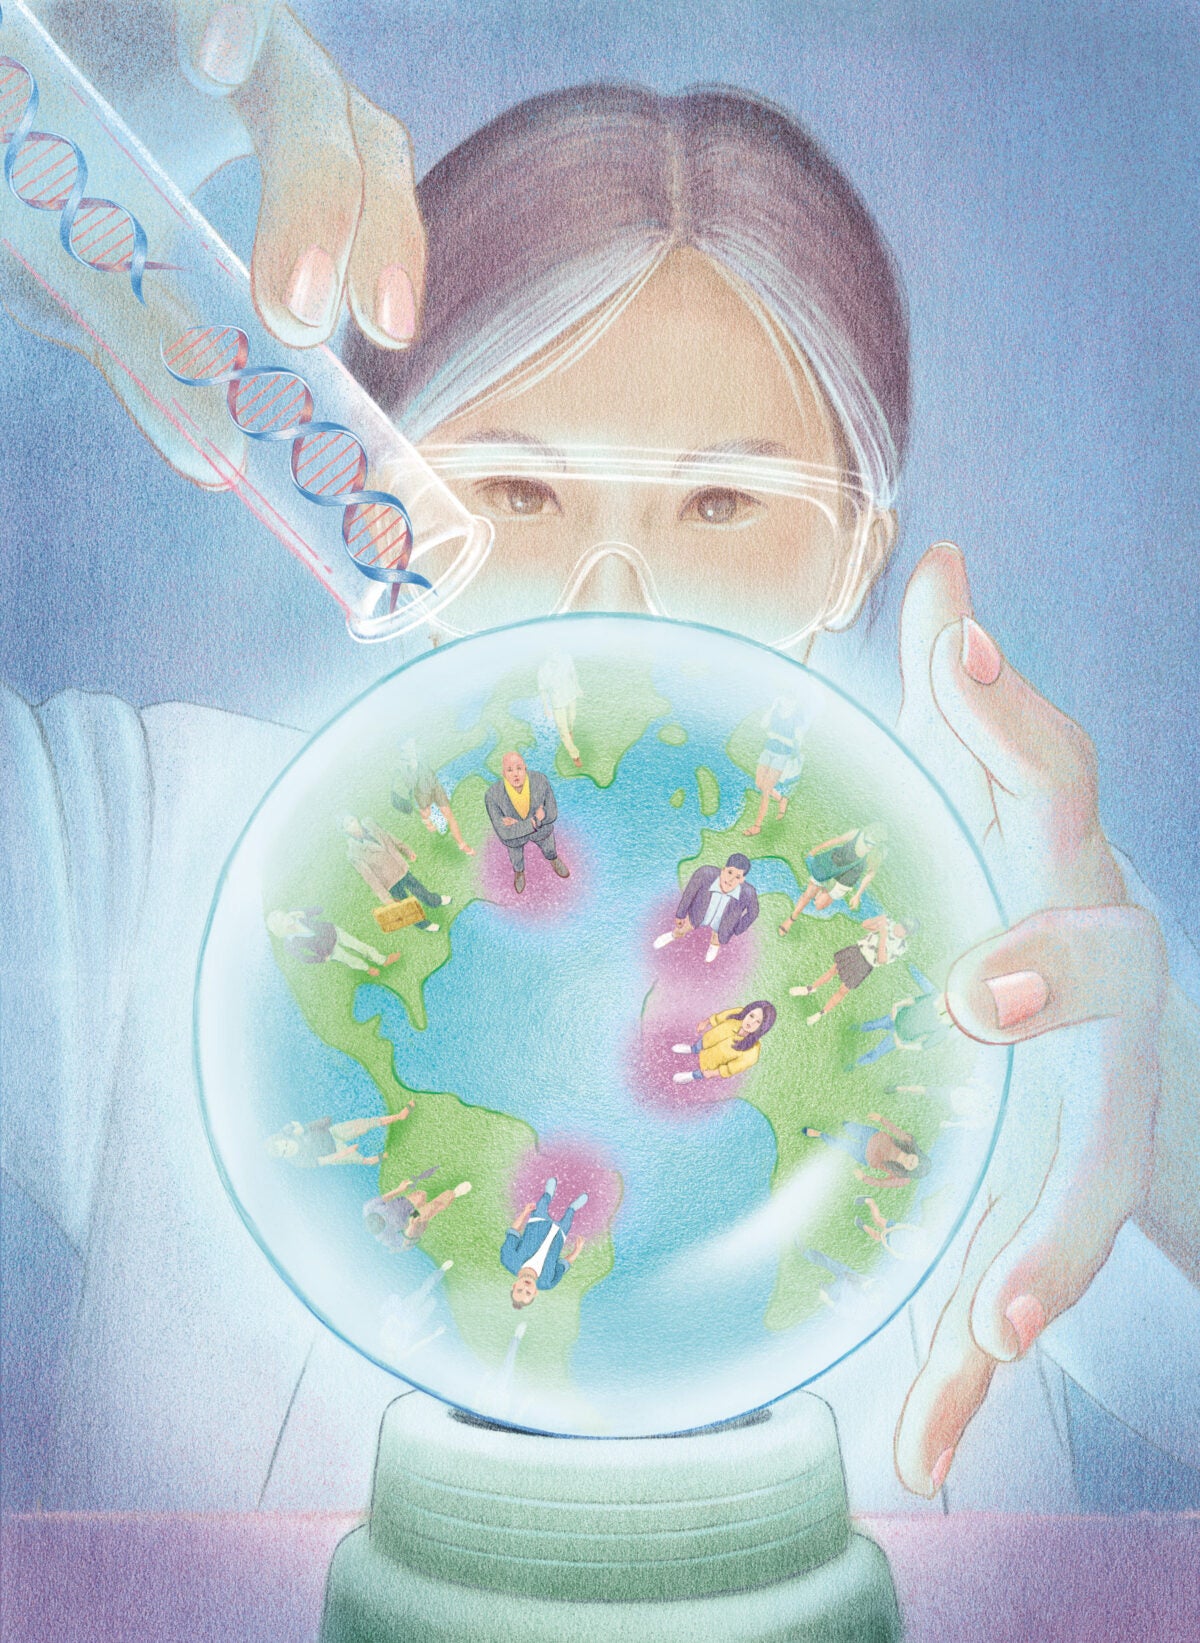 Illustration: A scientist gazes into a crystal ball. One hand has a test-tube full of DNA molecules while the other rests on the other side of the ball. Inside the sphere is the earth with humans standing on the continent. Certain figures are highlighted with a purple spot.